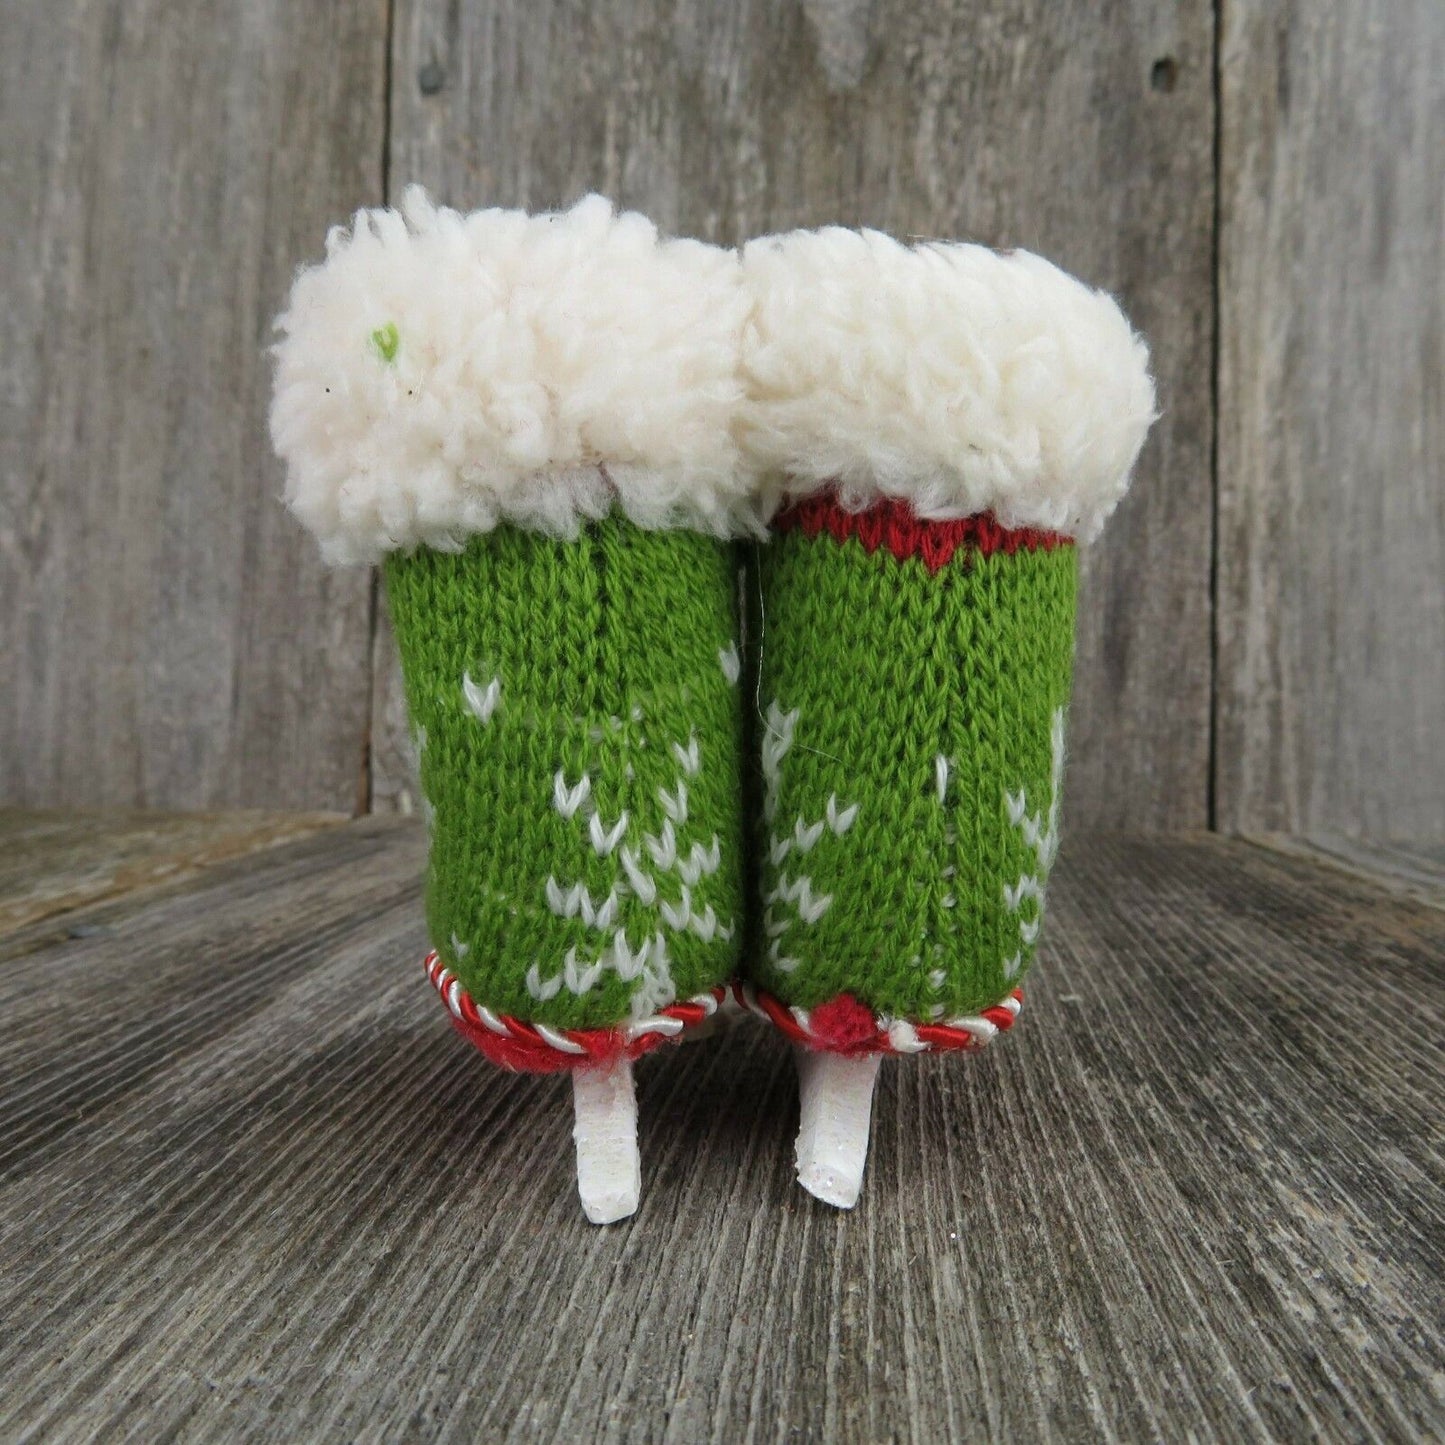 Vintage Ice Skates Ornament Knit Wood Stocking Rustic Old World Green Red White - At Grandma's Table